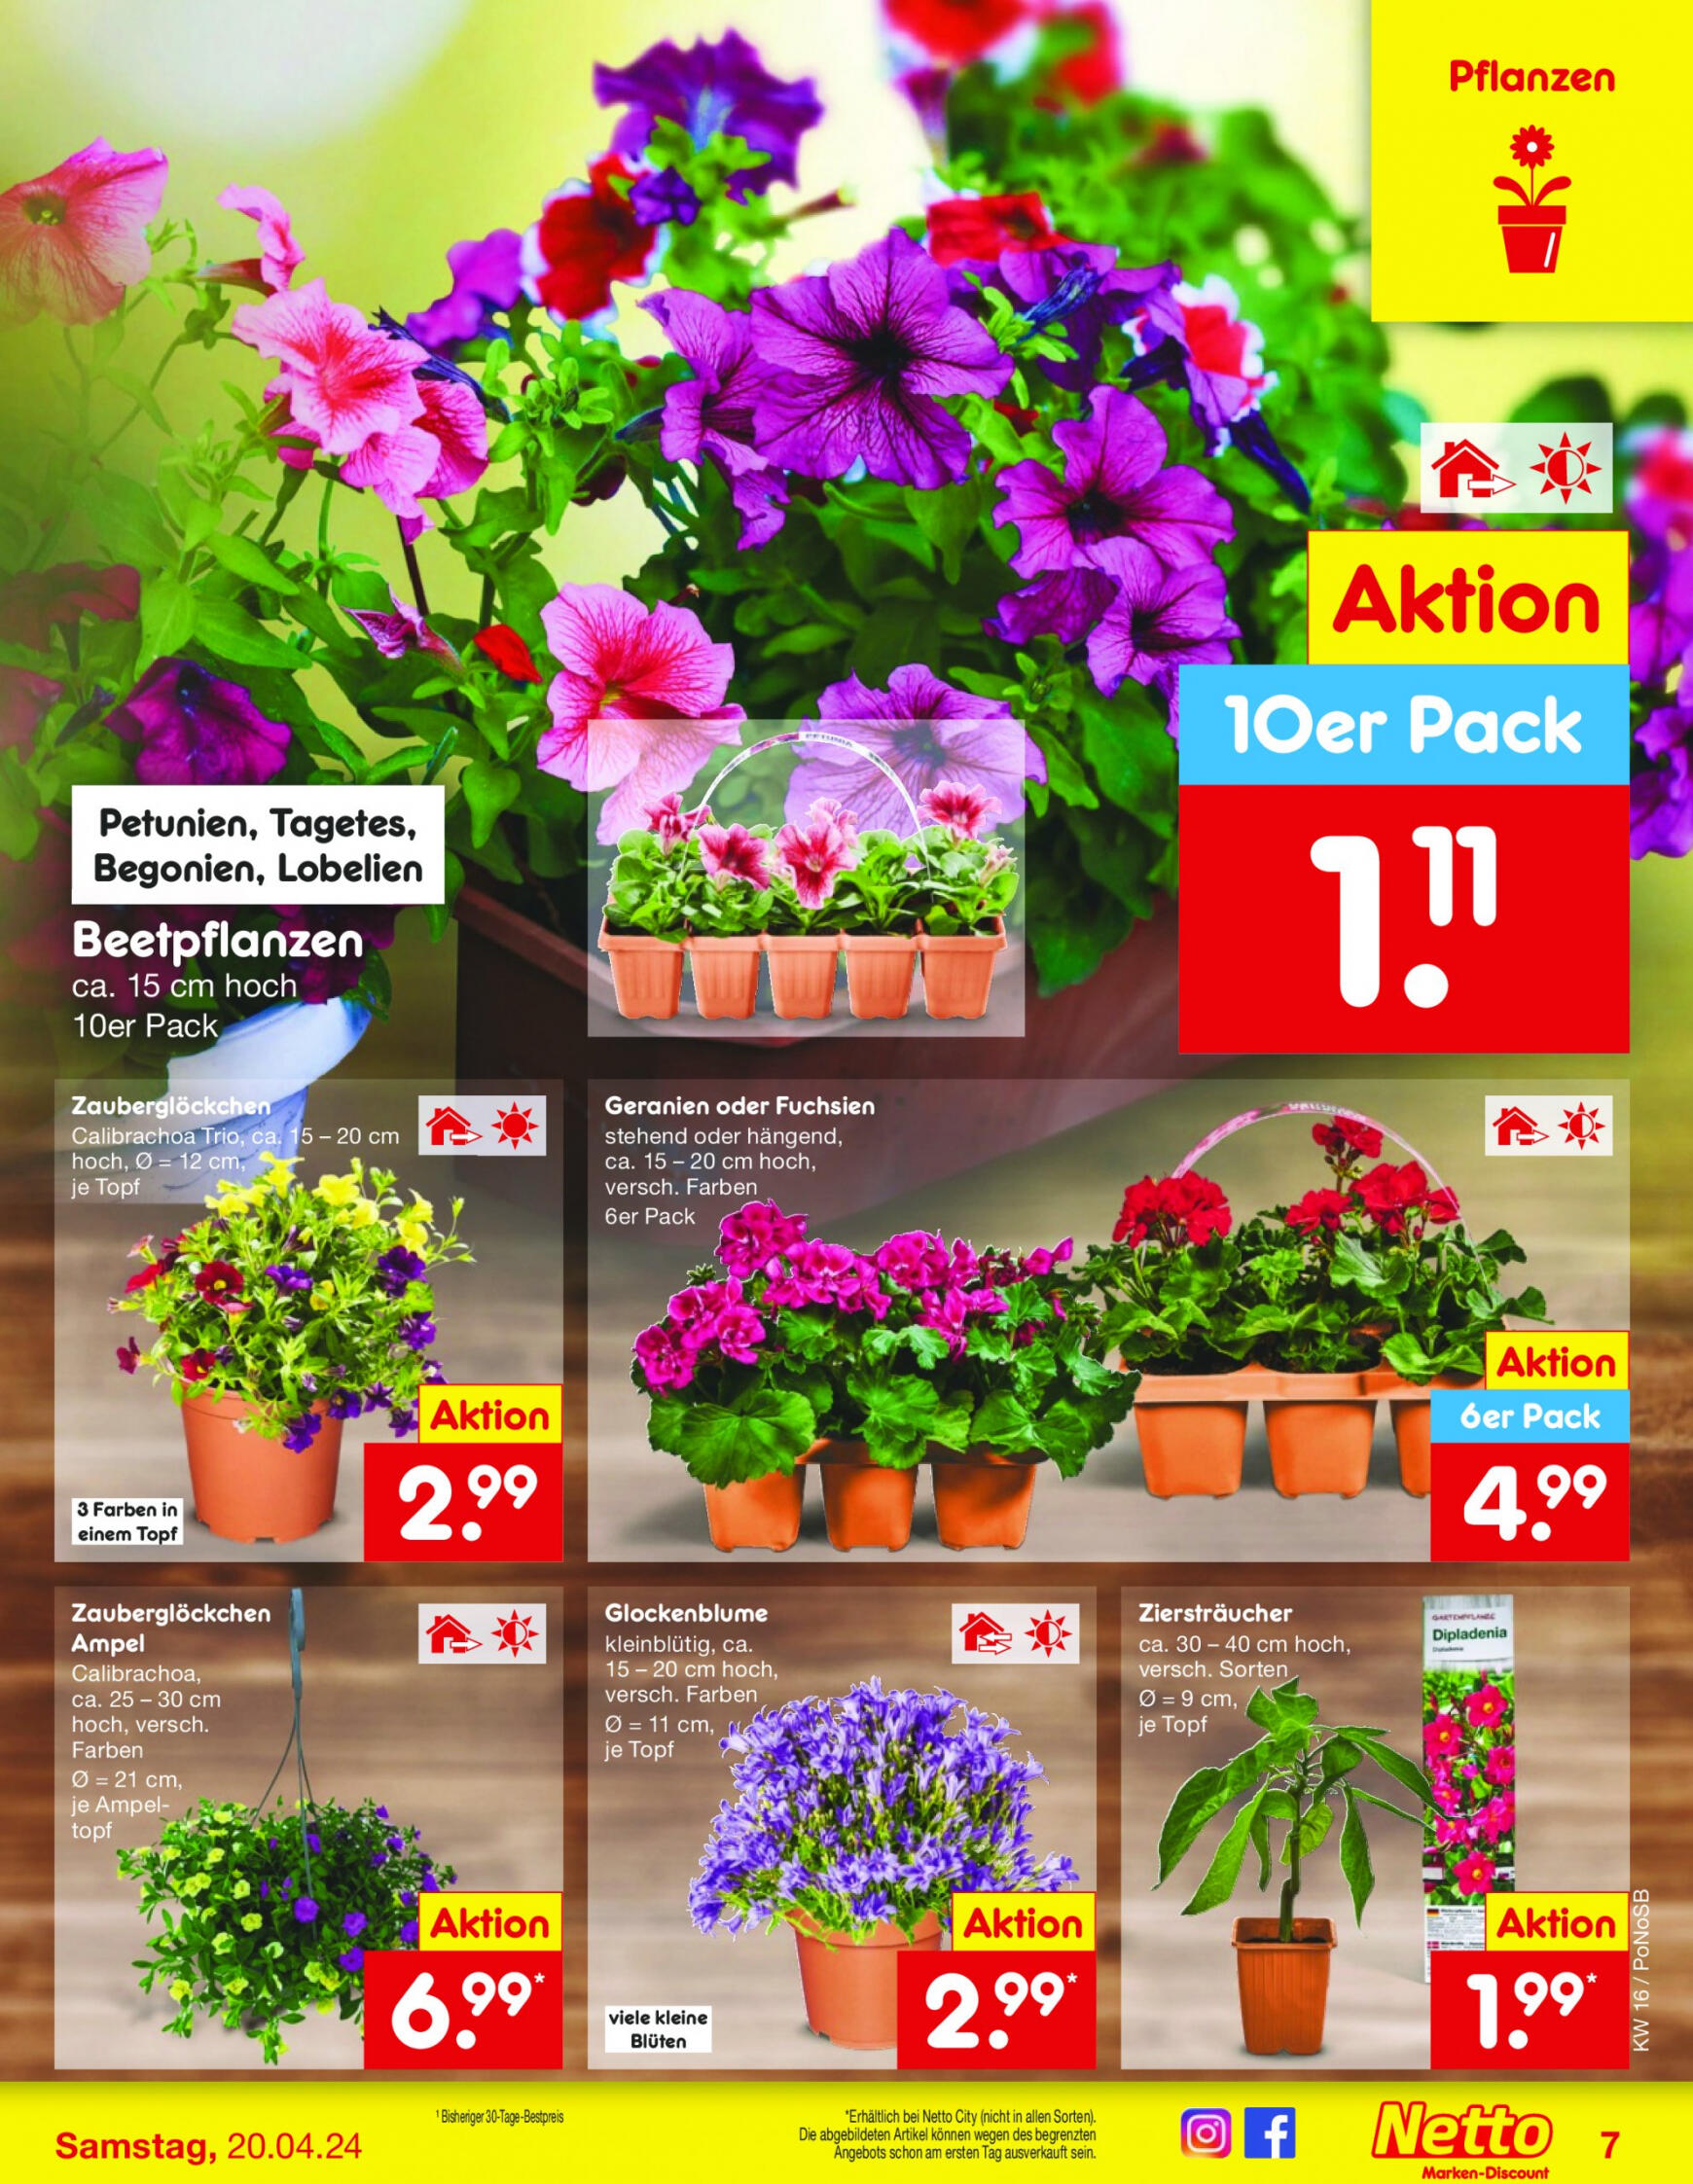 netto - Flyer Netto aktuell 15.04. - 20.04. - page: 7